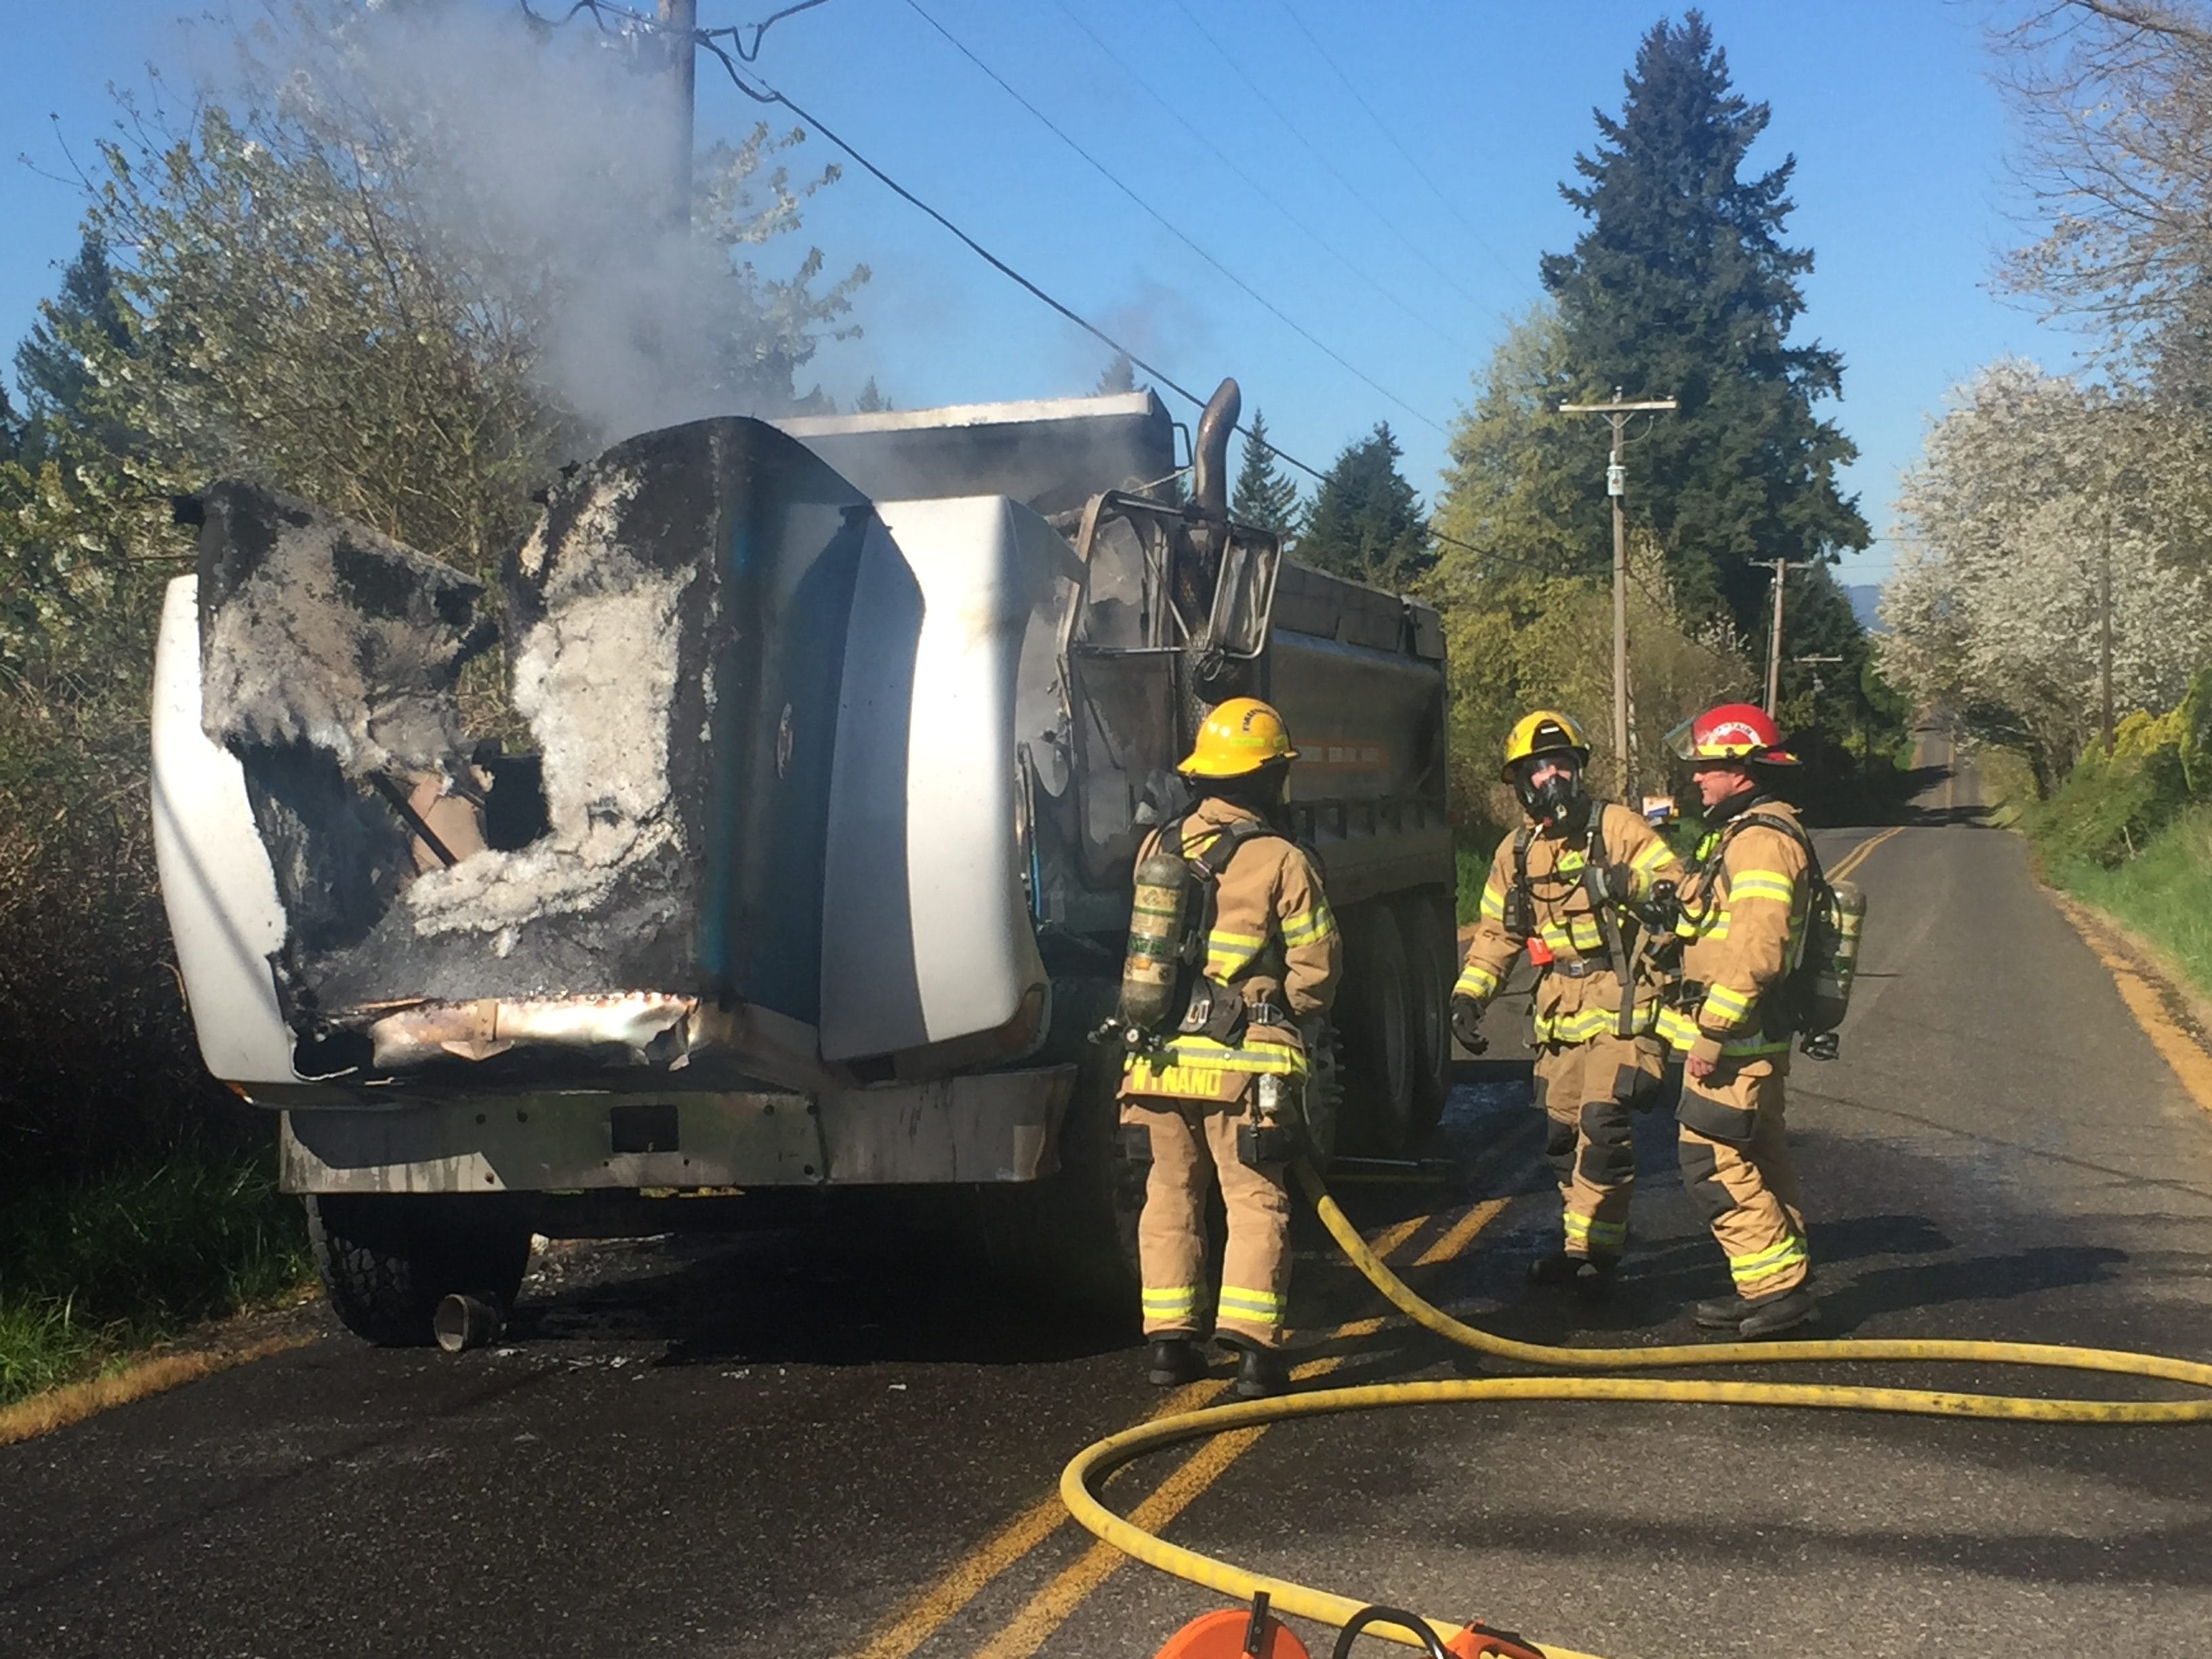 Firefighters with Clark County Fire & Rescue inspect a dump truck that caught fire Thursday morning near the 4500 block of Northwest 199th Street south of Ridgefield.